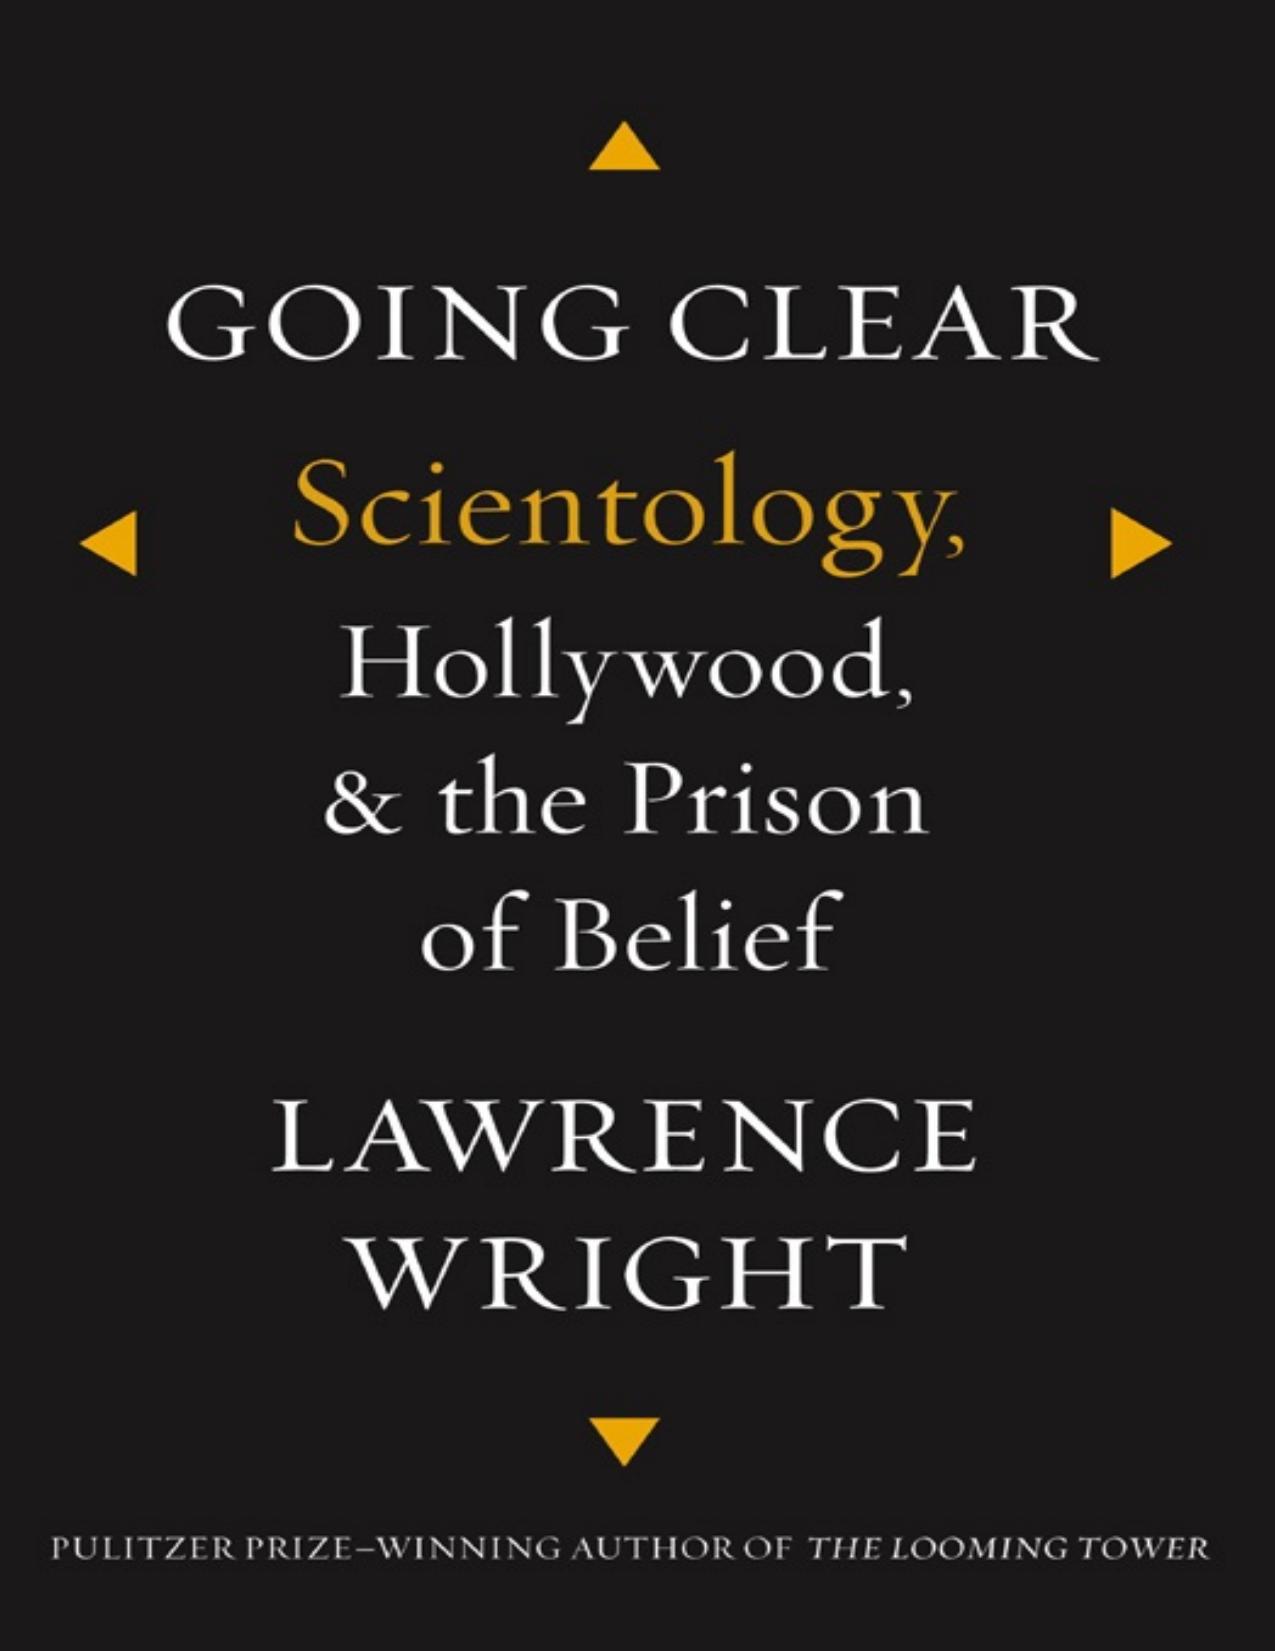 Going Clear by Lawrence Wright